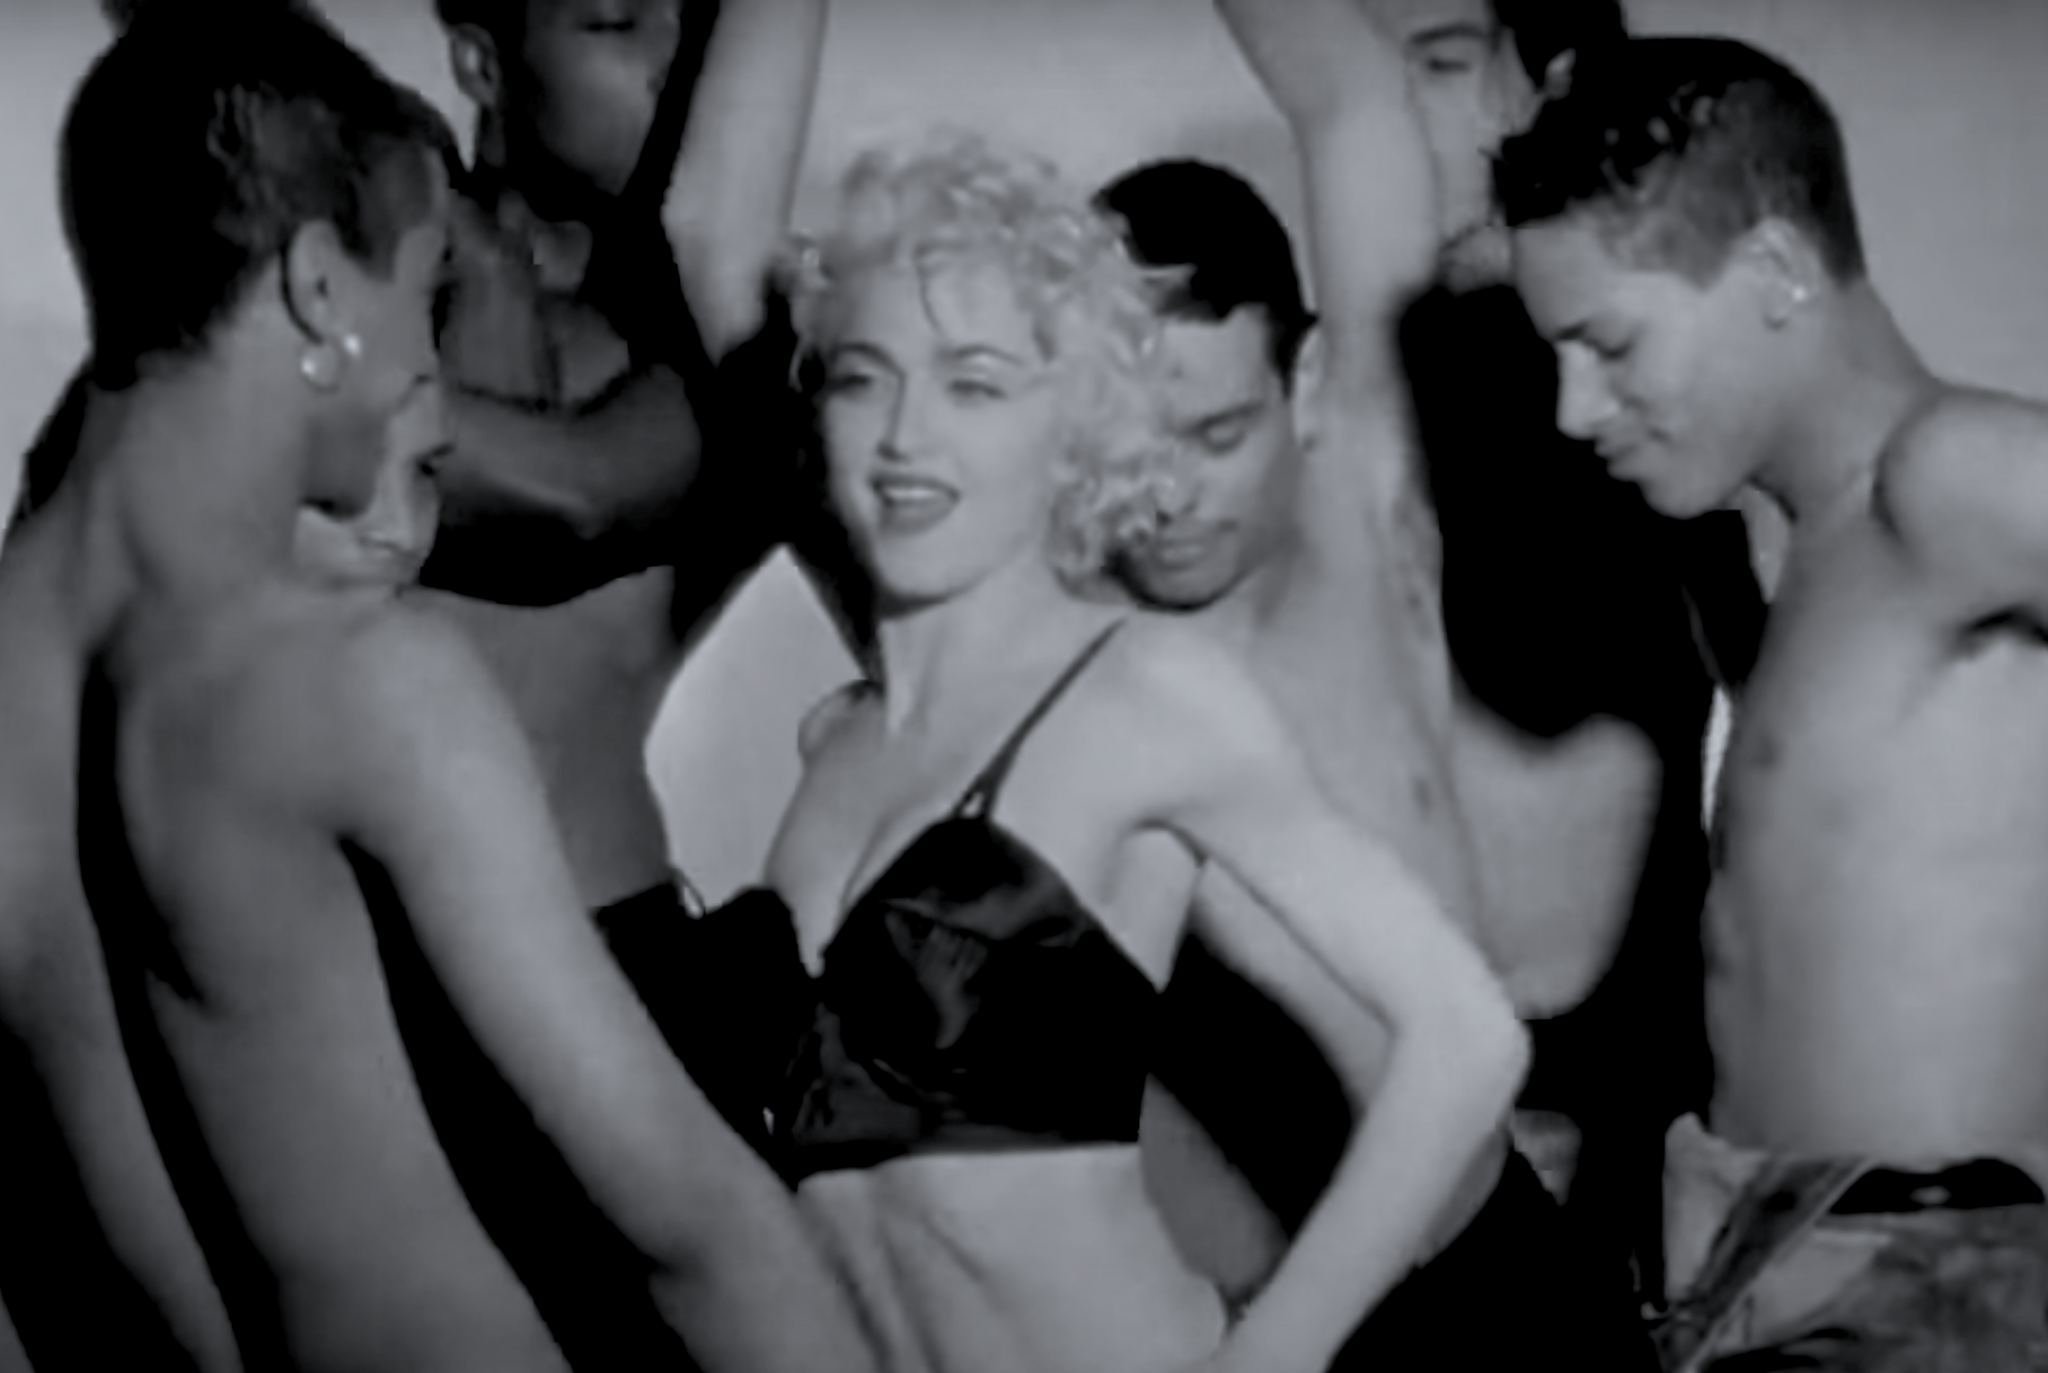 Examining the Politics of Madonnas Truth or Dare, 30 Years Later KQED